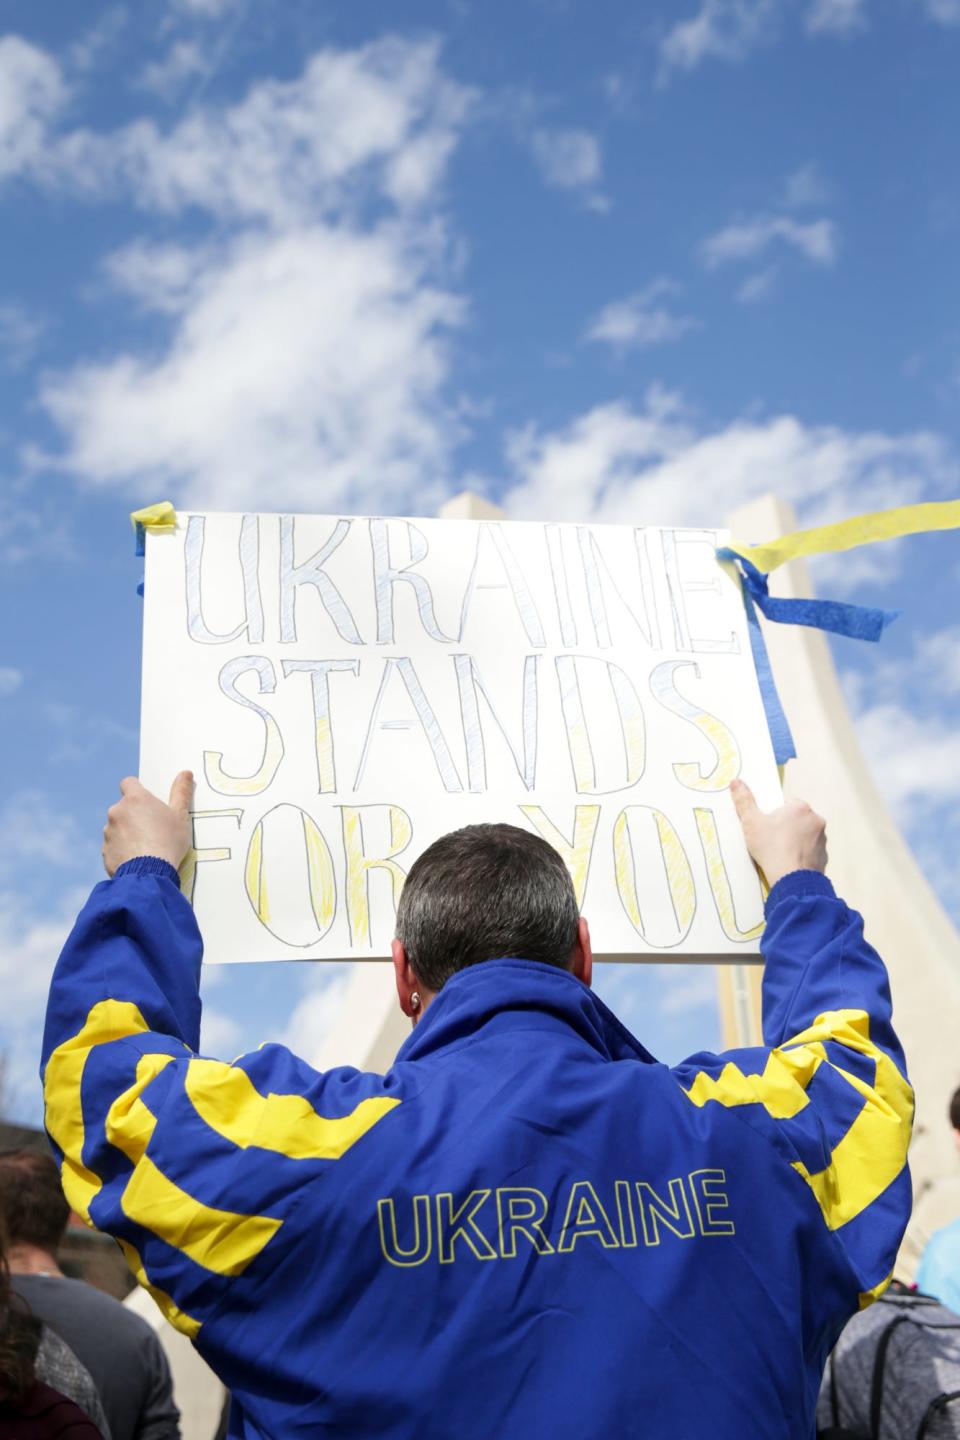 A man holds a "Ukraine stands for you" sign during a rally at Purdue University against Russia's invasion of Ukraine, Wednesday, March 2, 2022 in West Lafayette.